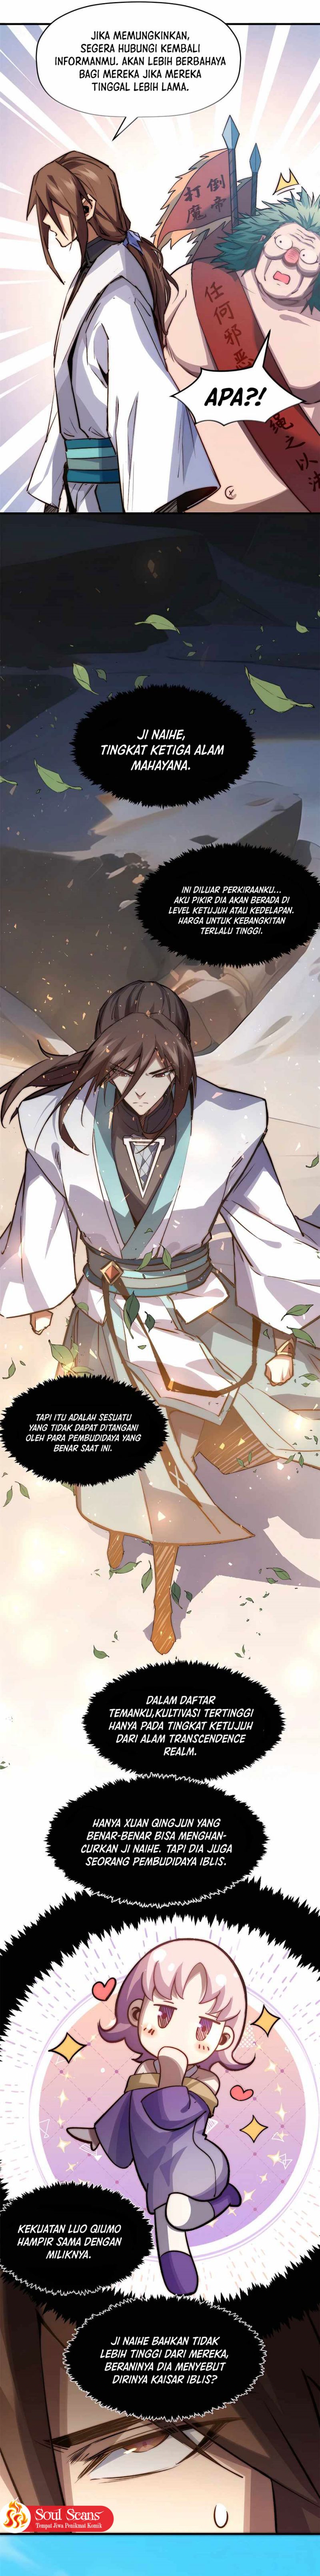 Dilarang COPAS - situs resmi www.mangacanblog.com - Komik top tier providence secretly cultivate for a thousand years 122 - chapter 122 123 Indonesia top tier providence secretly cultivate for a thousand years 122 - chapter 122 Terbaru 10|Baca Manga Komik Indonesia|Mangacan